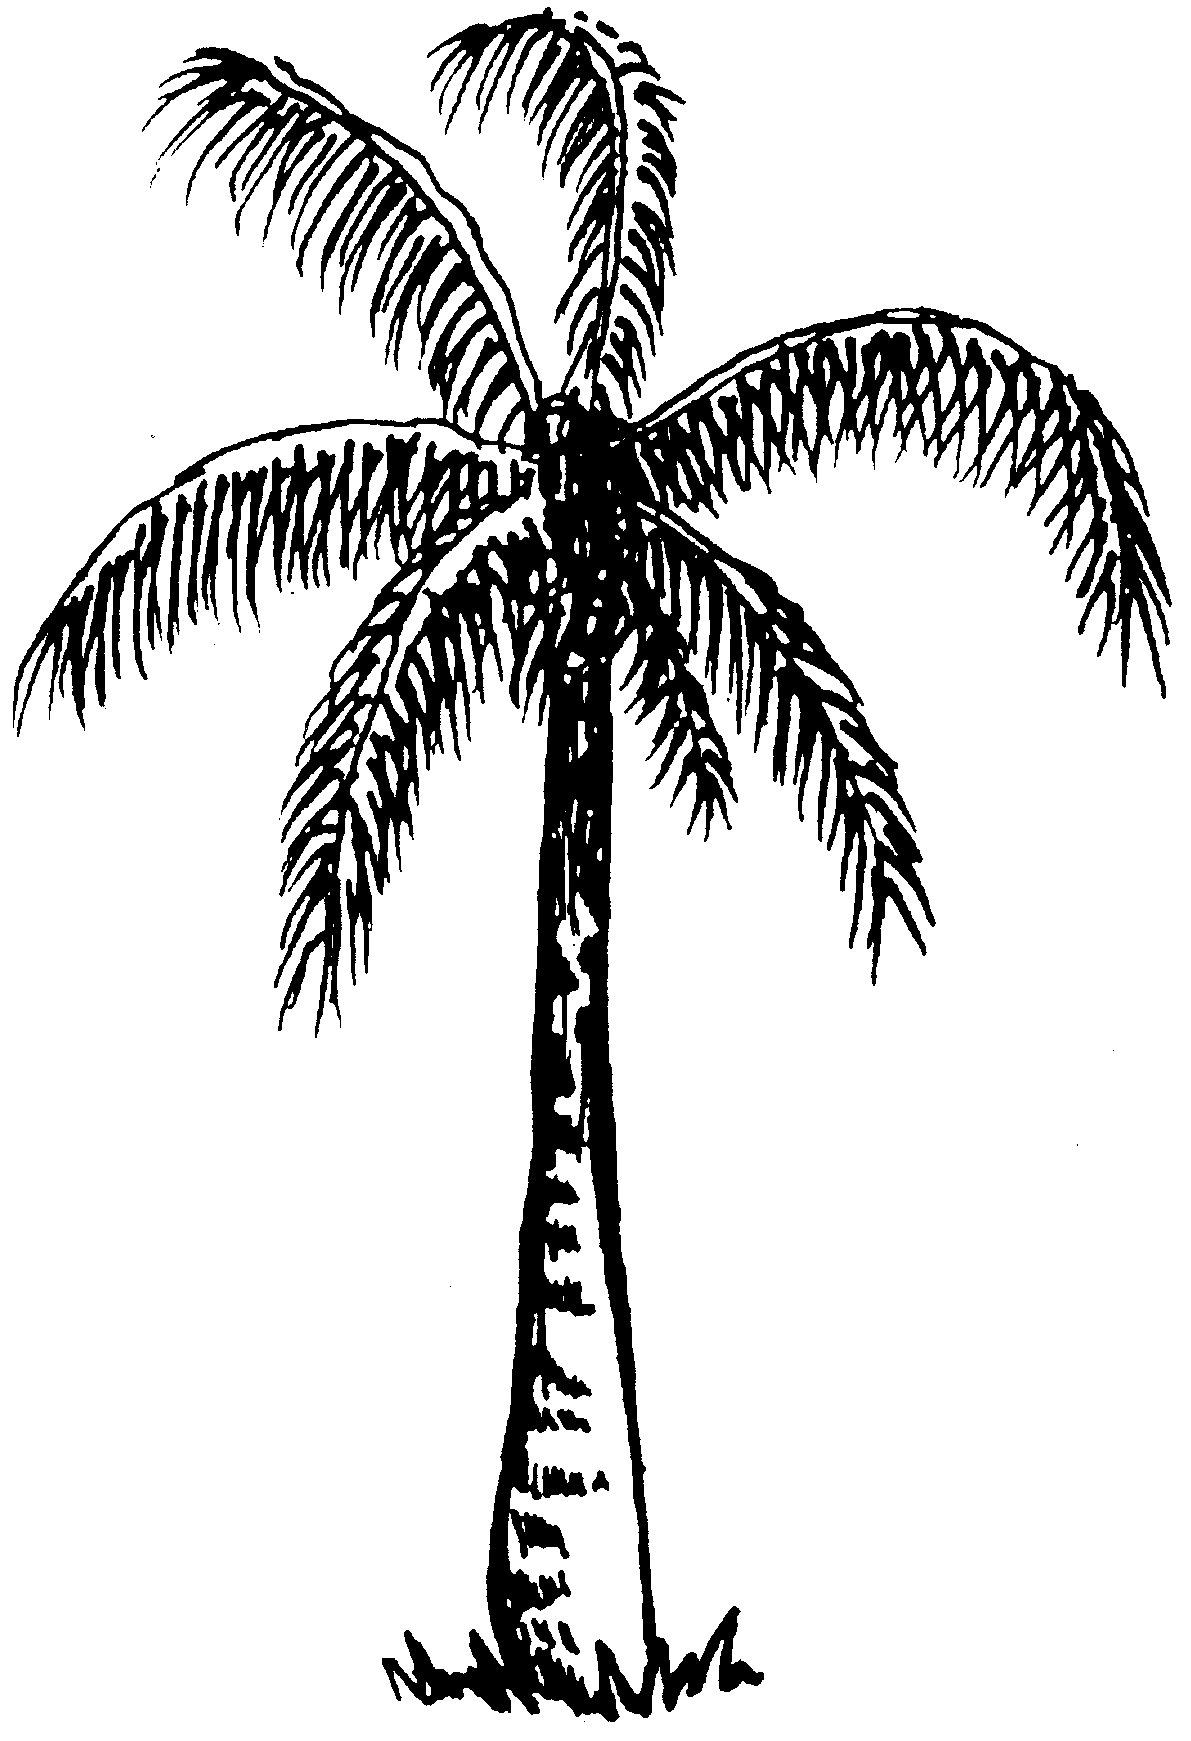 Tree Images Clipart Black And White : Tree Drawings Black And White ...